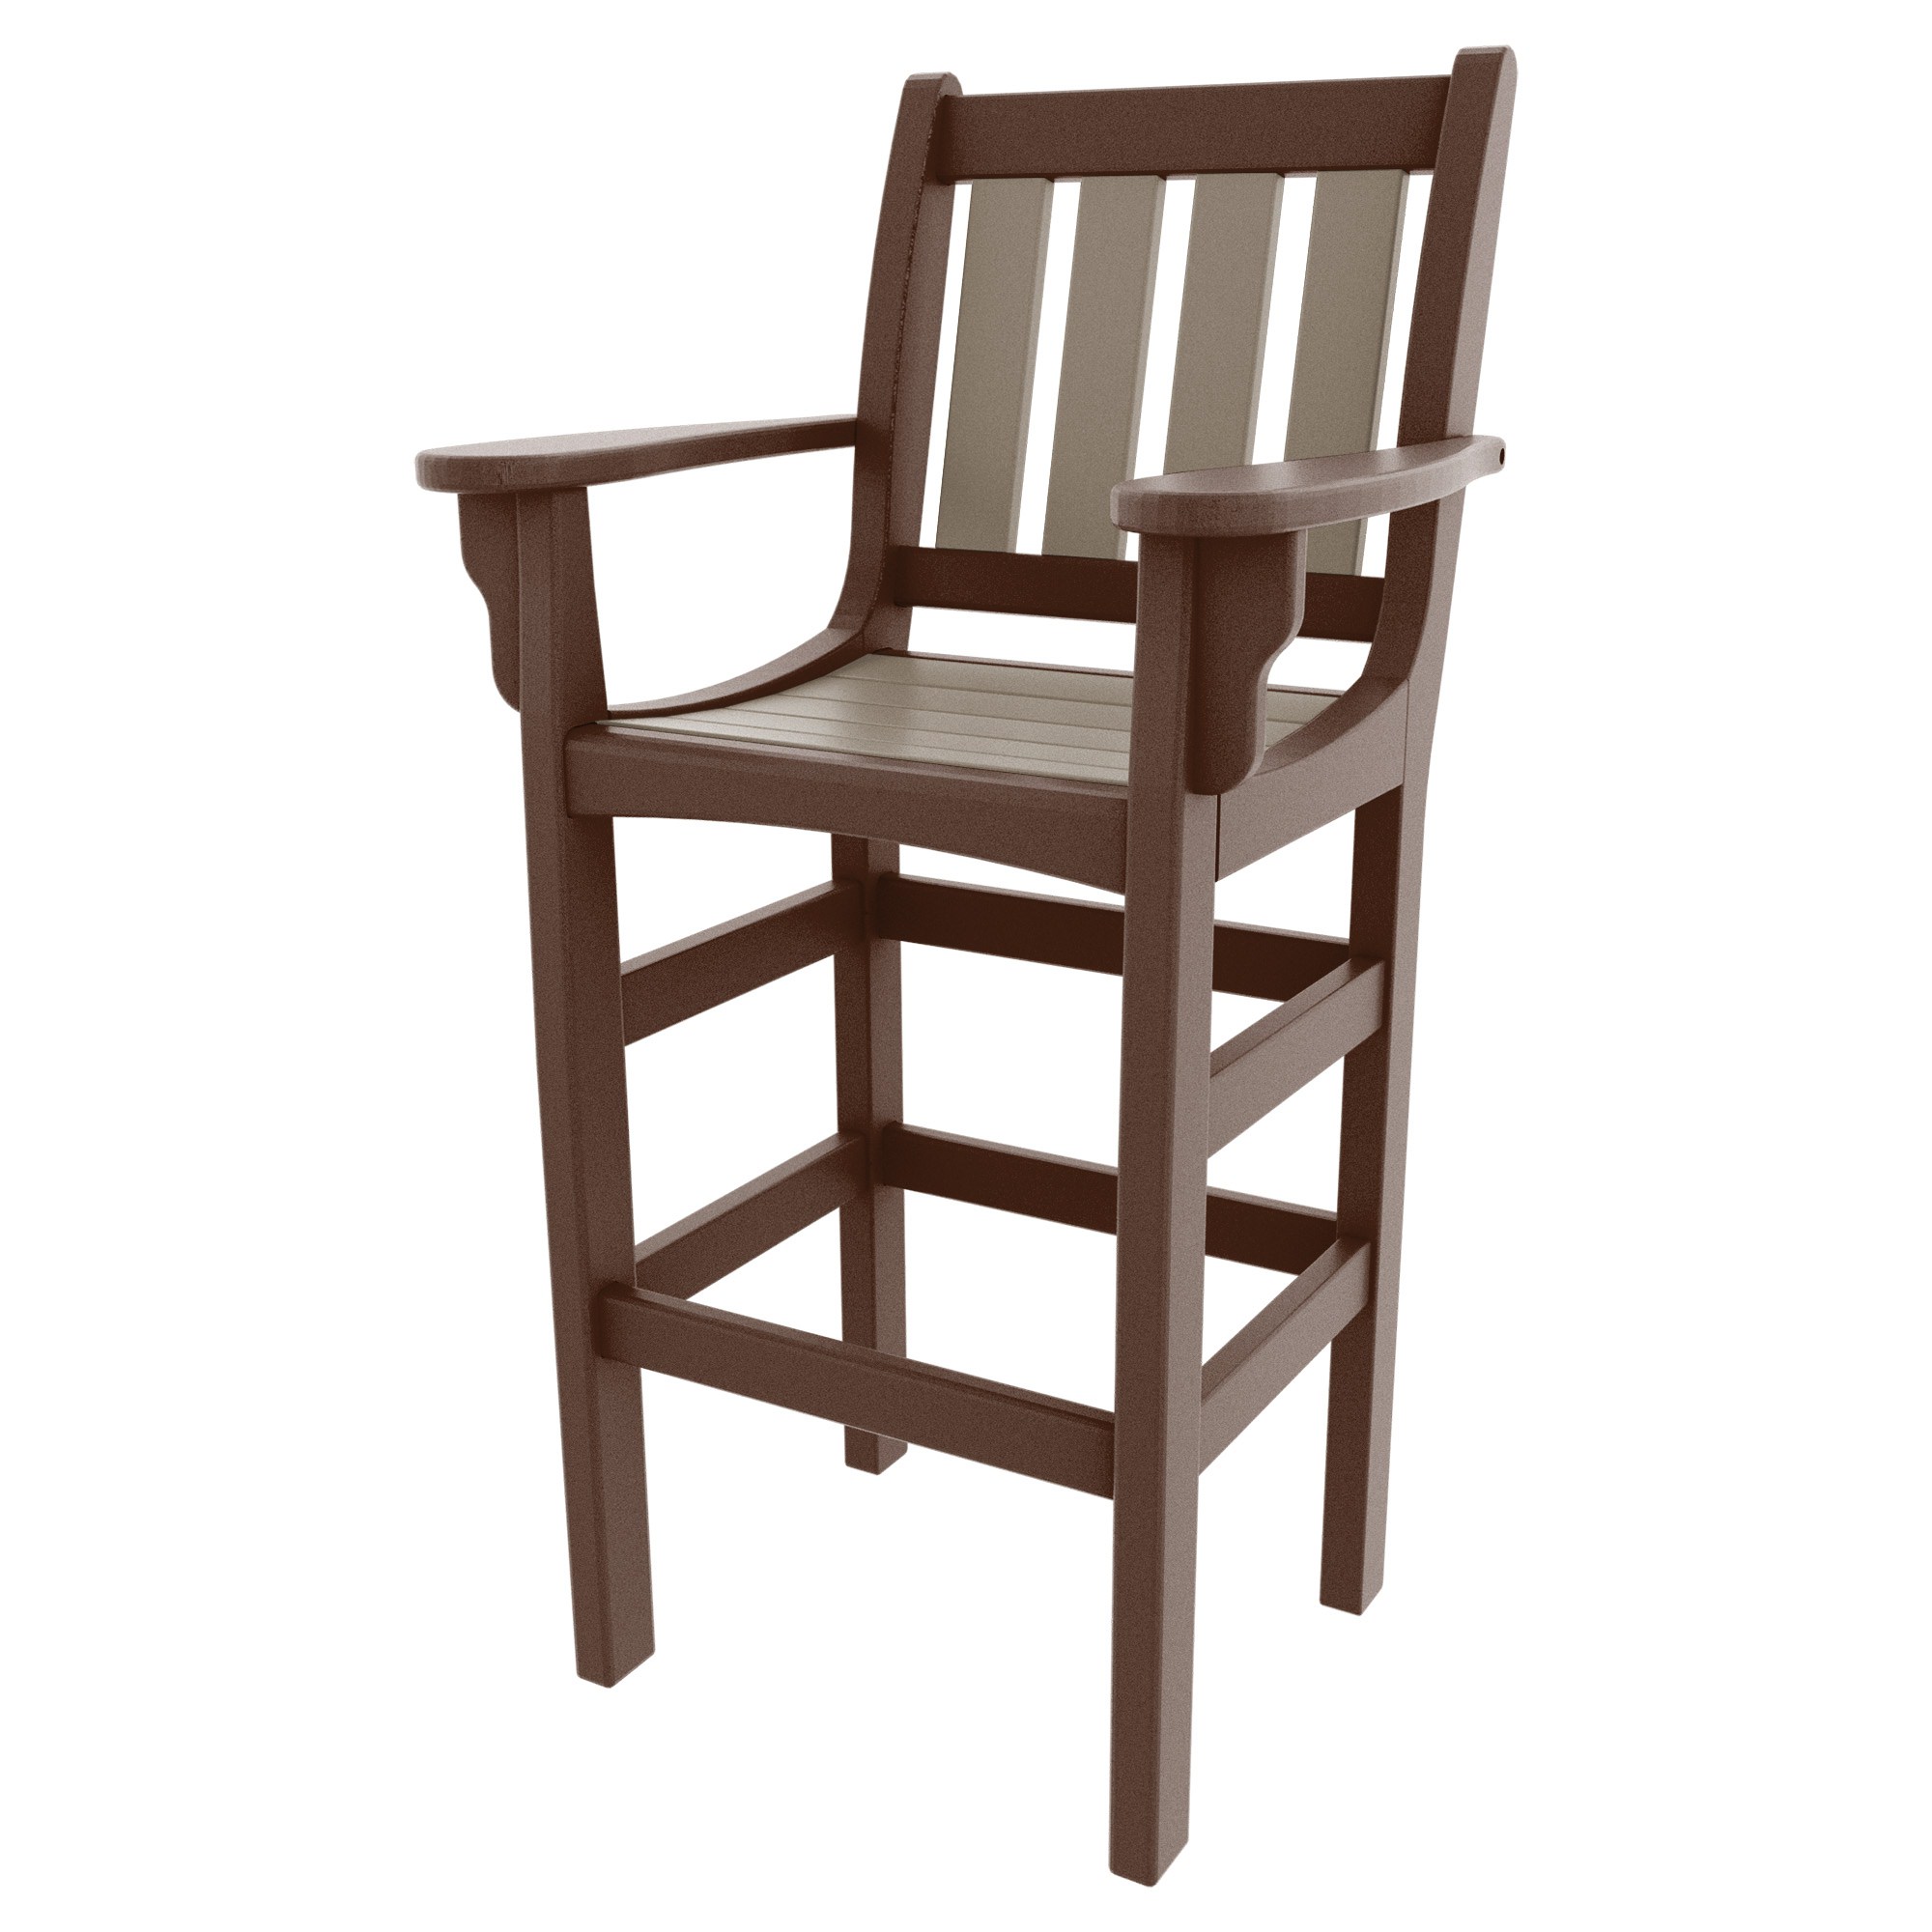 DURAWOOD® Vertical Bar Height Chair with Arm | VHDCA1-K | Pawleys